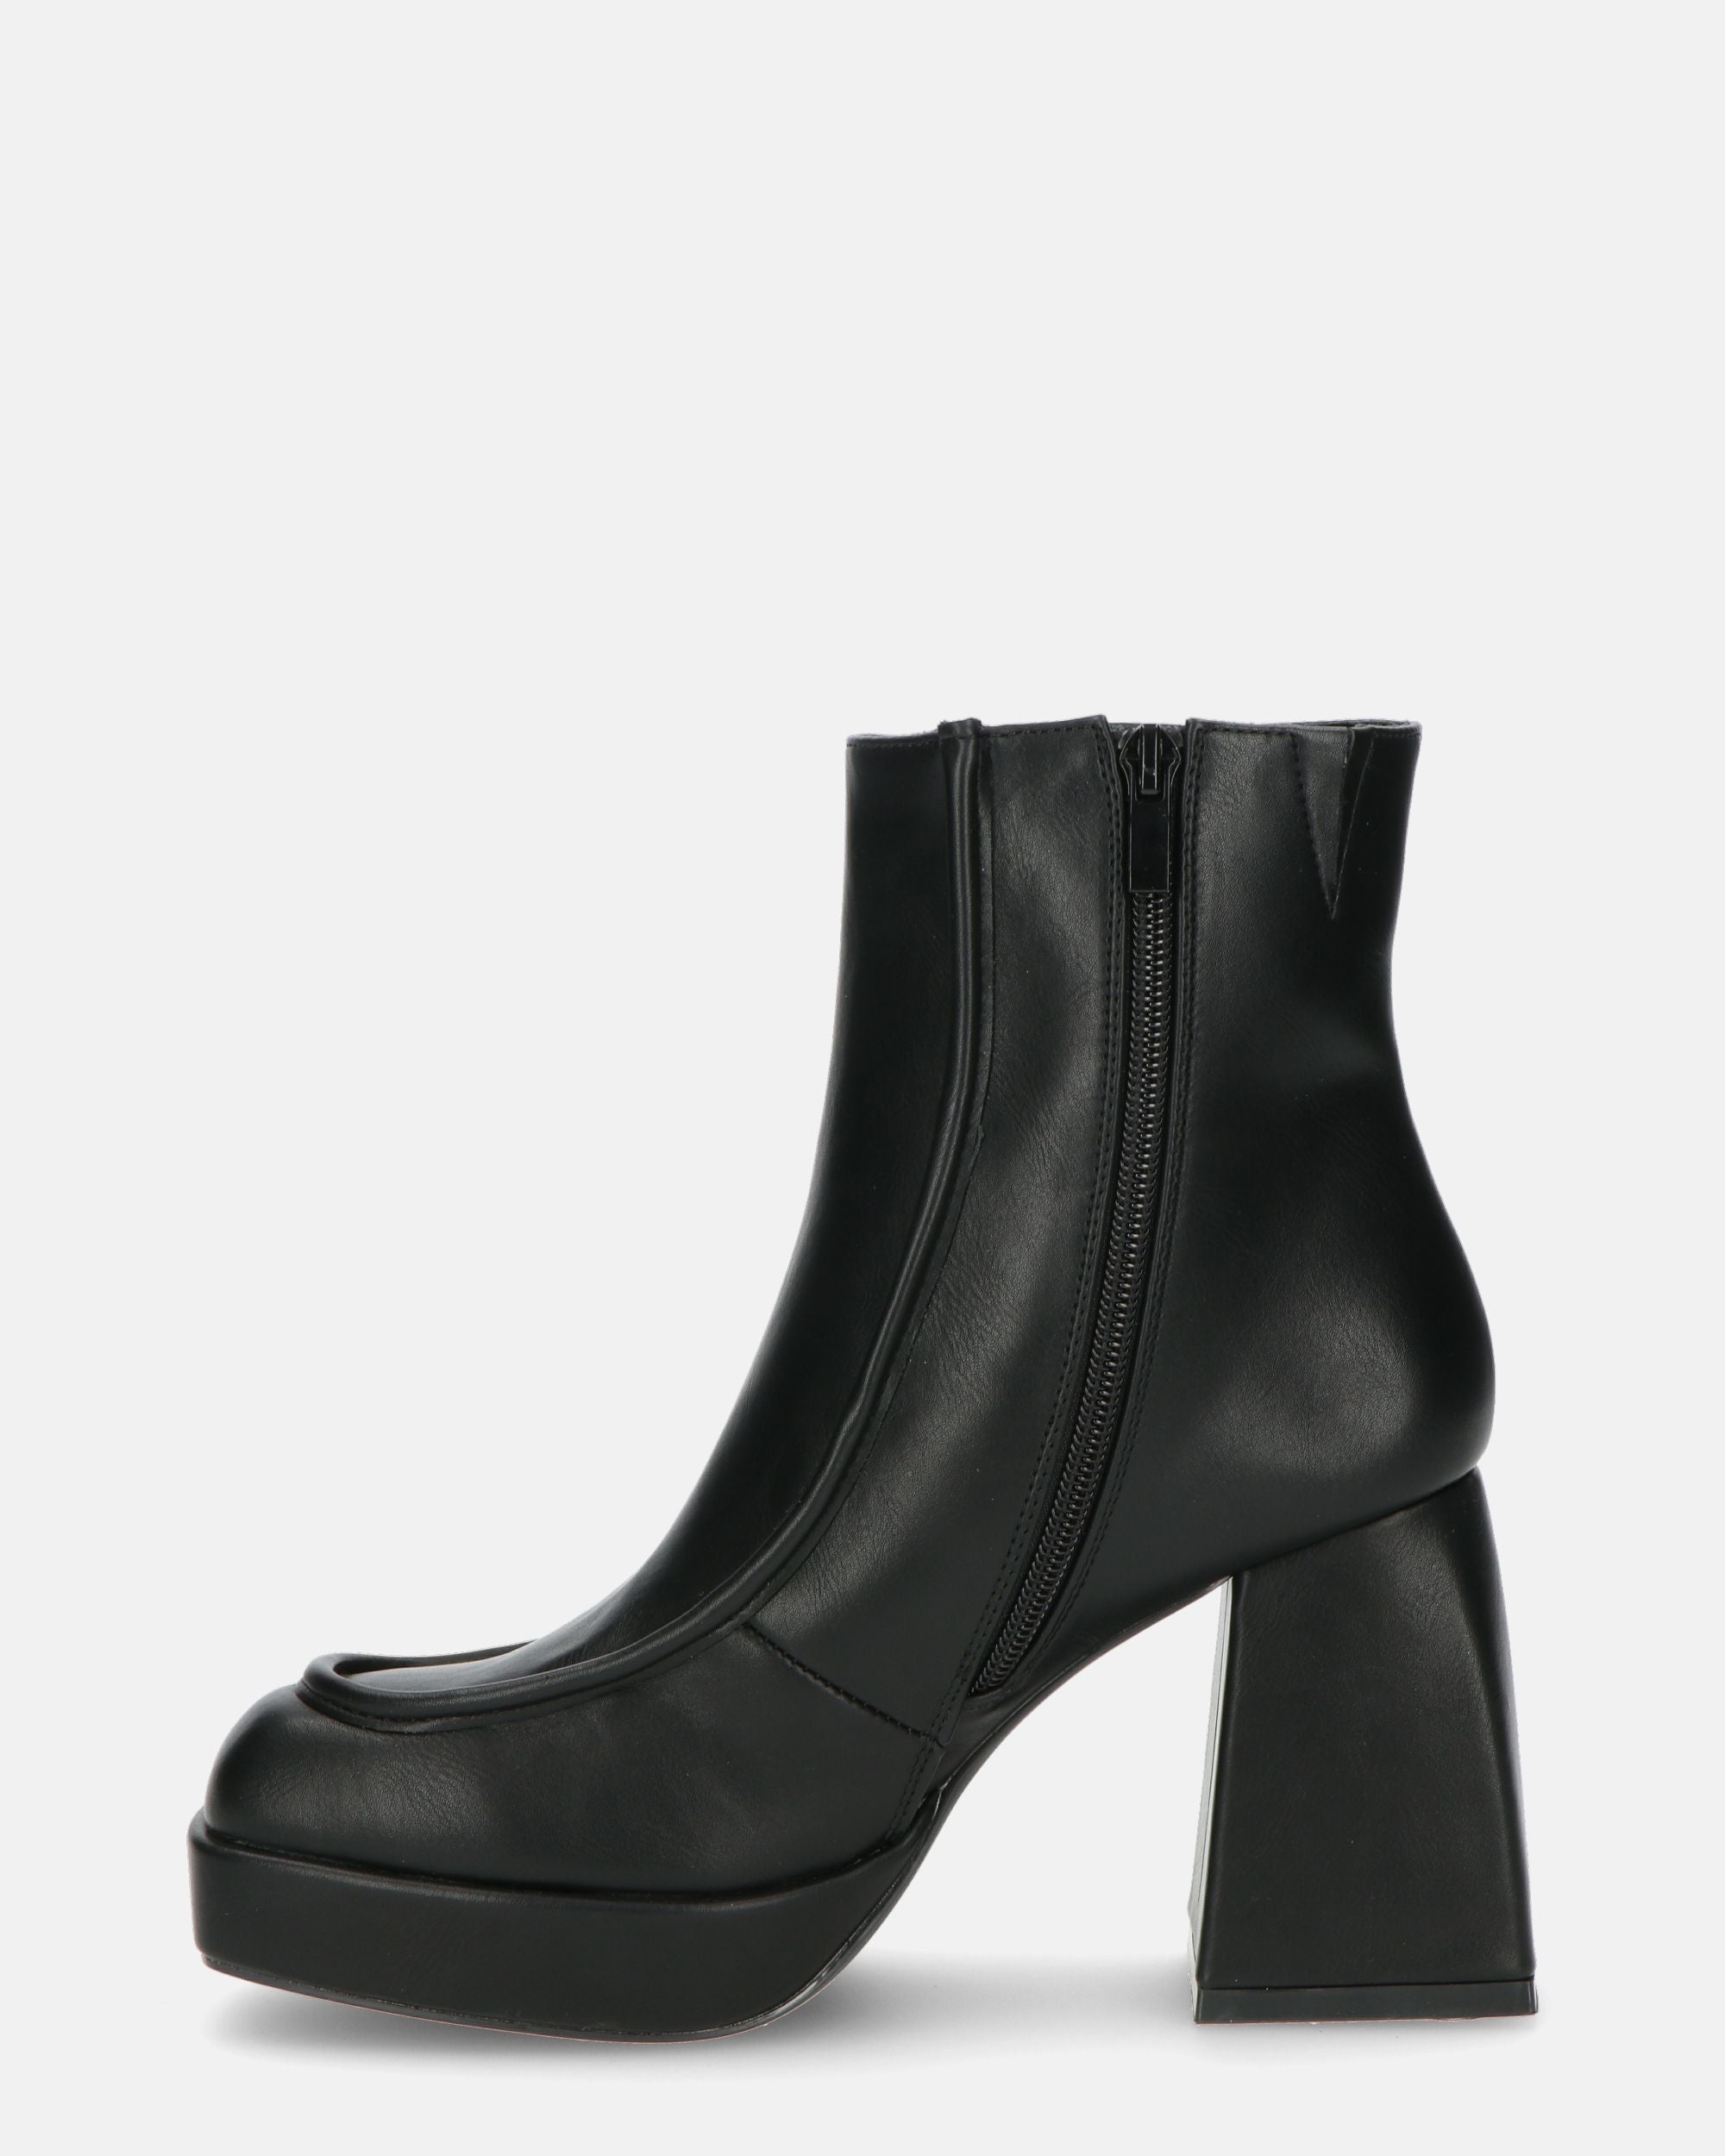 SEVERINA - black ankle boots with square heel in eco-leather